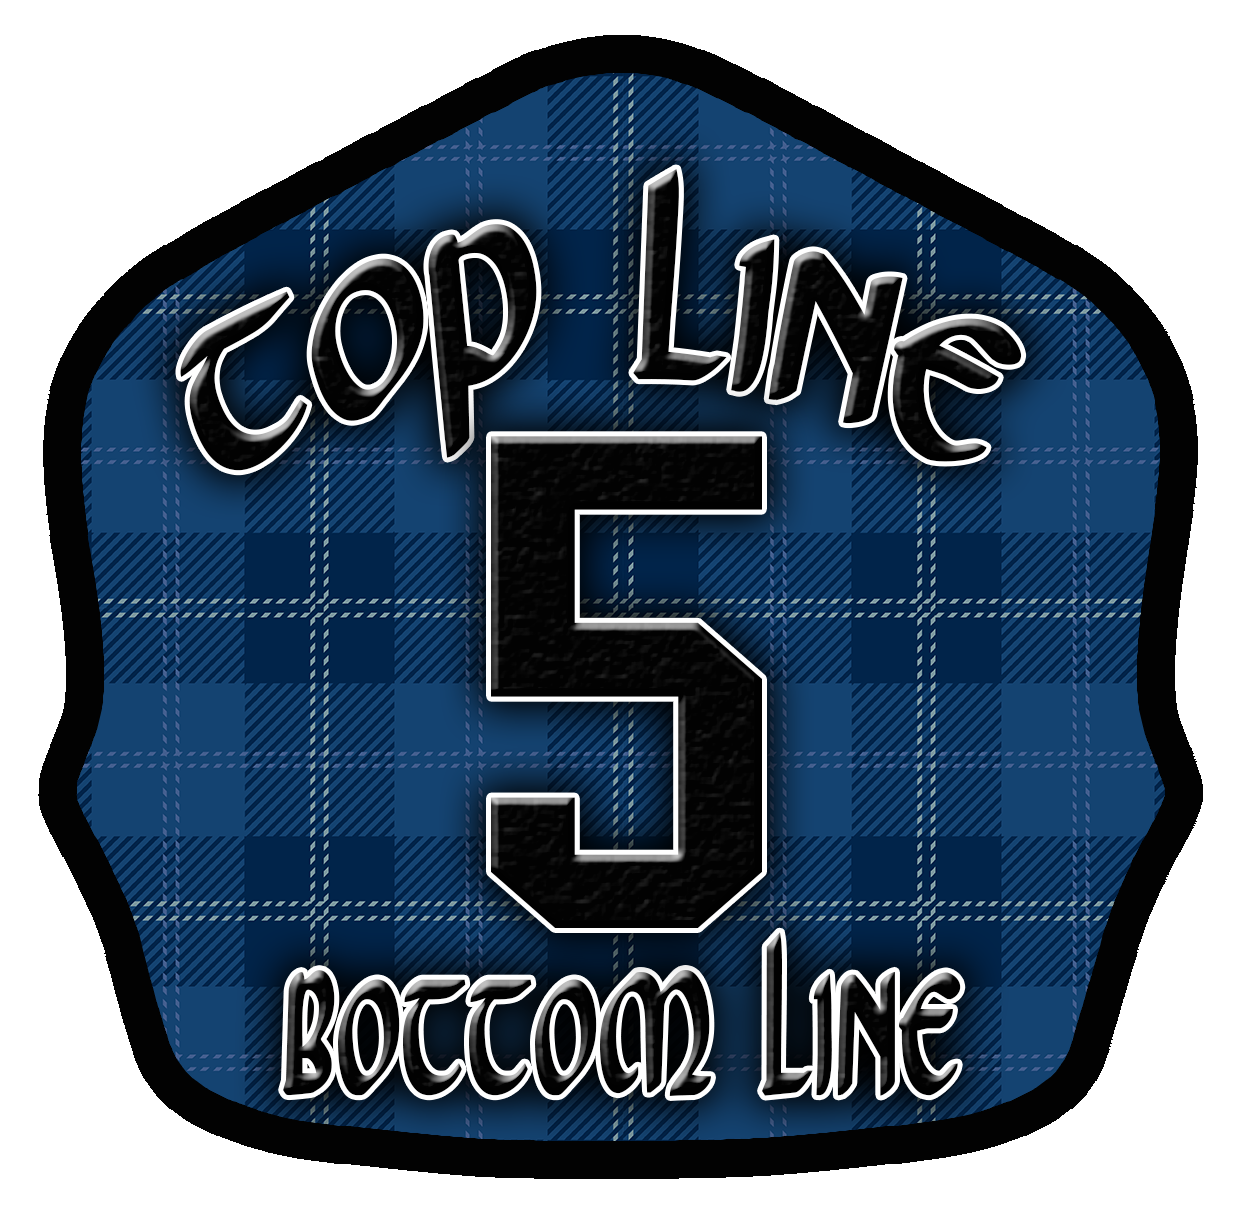 Classic Style Quick Tin-Blue Plaid Background- 074 Firefighting Gear Firefighting Gear